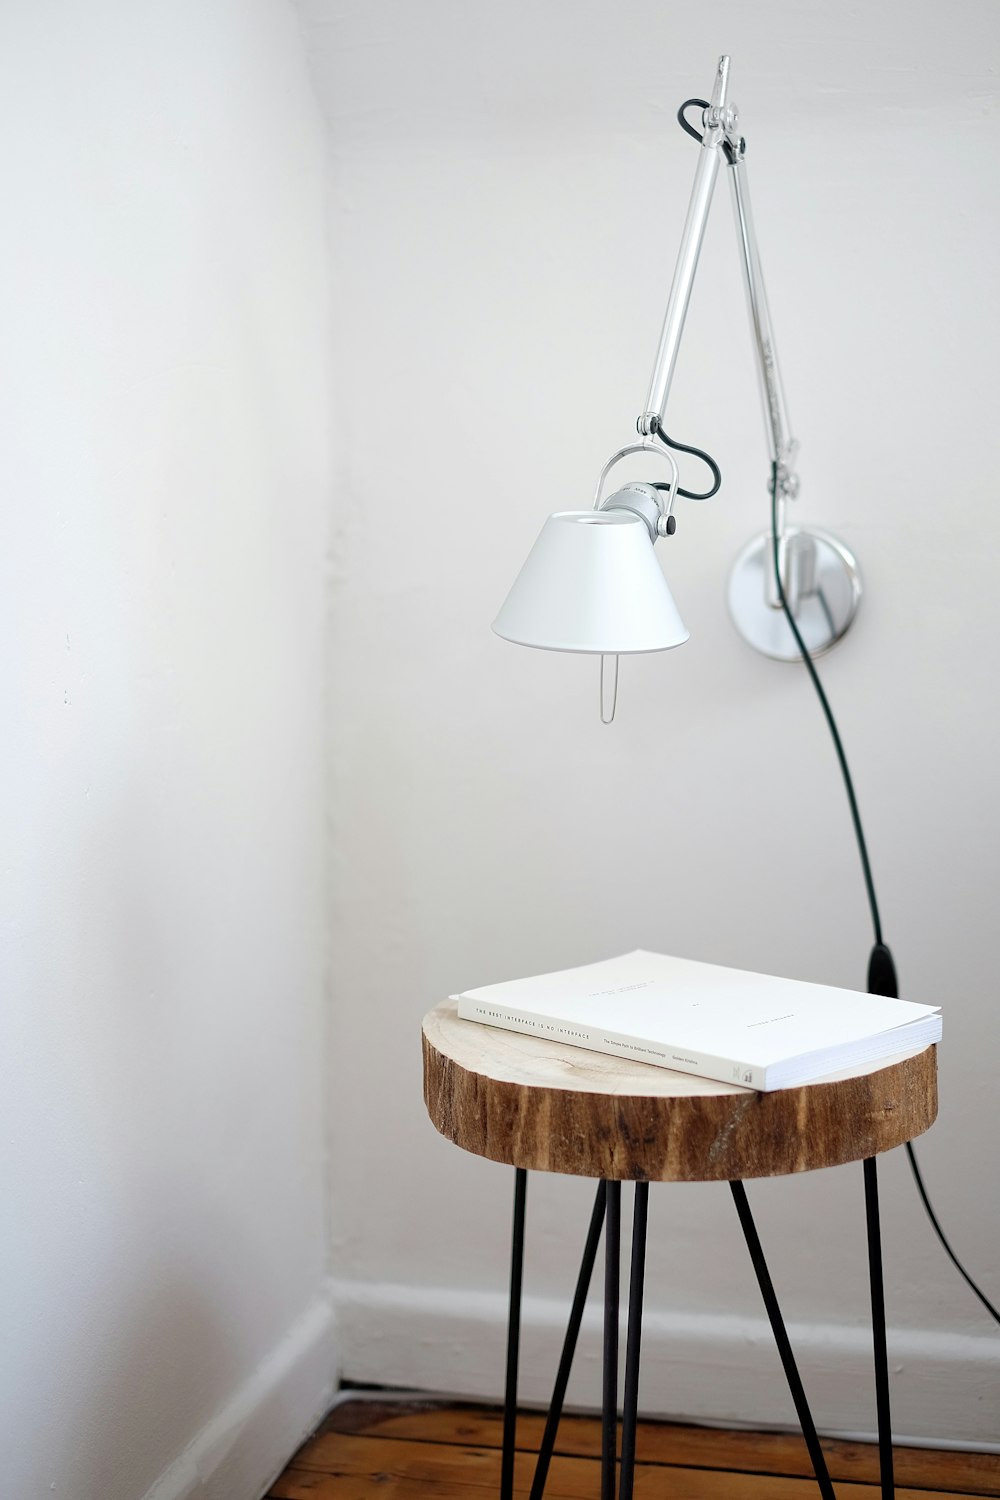 Gray Desk Lamp Mount On White Wall Under Brown Stool With